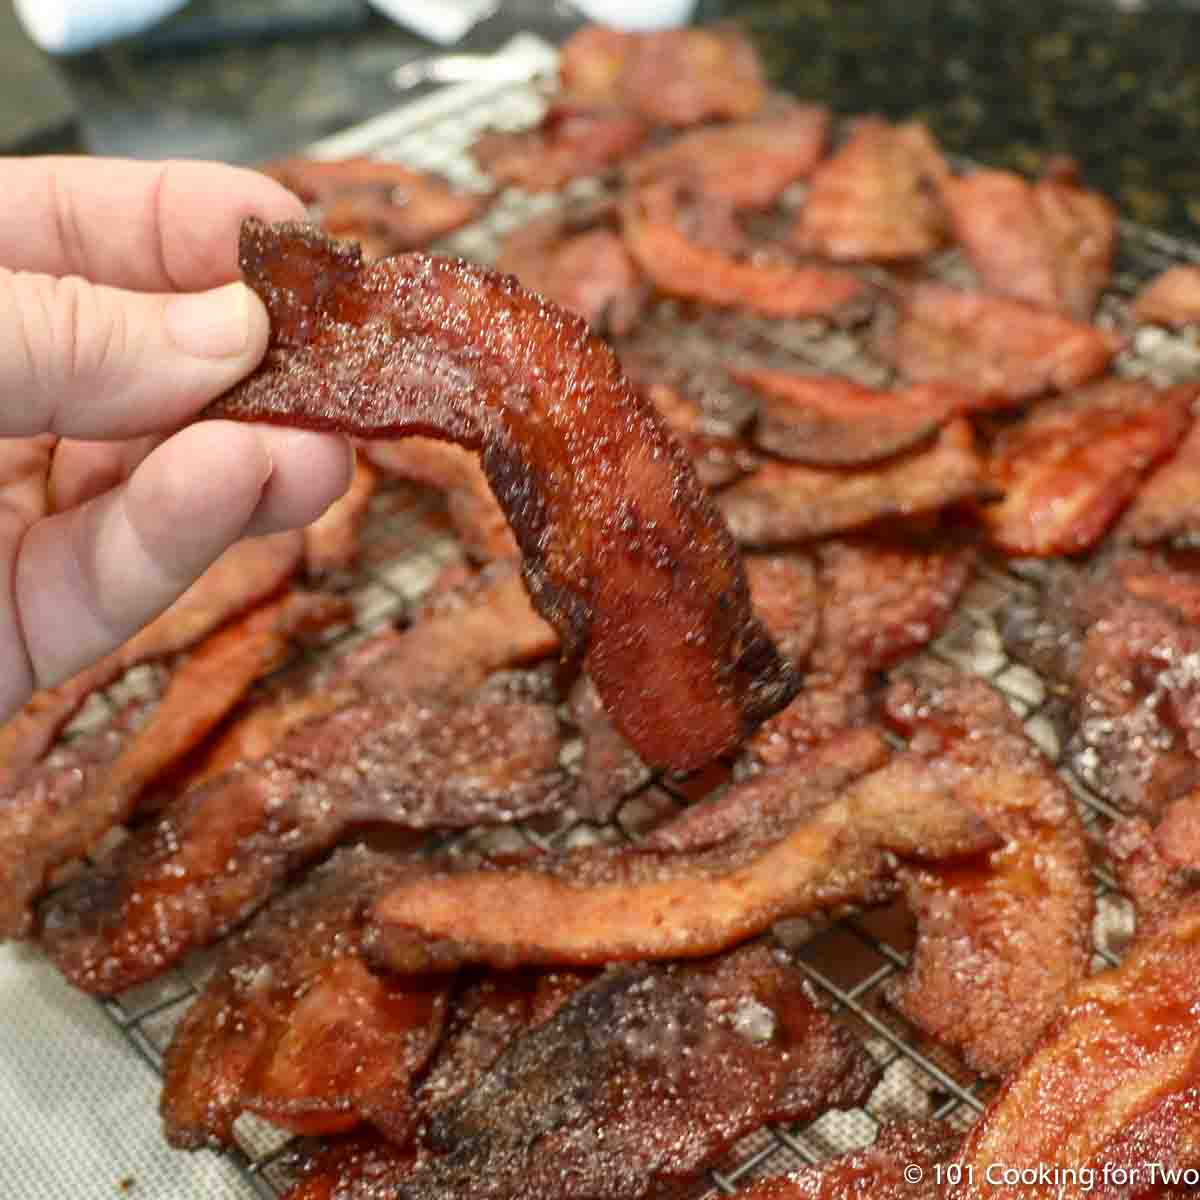 candied bacon being held above the tray.